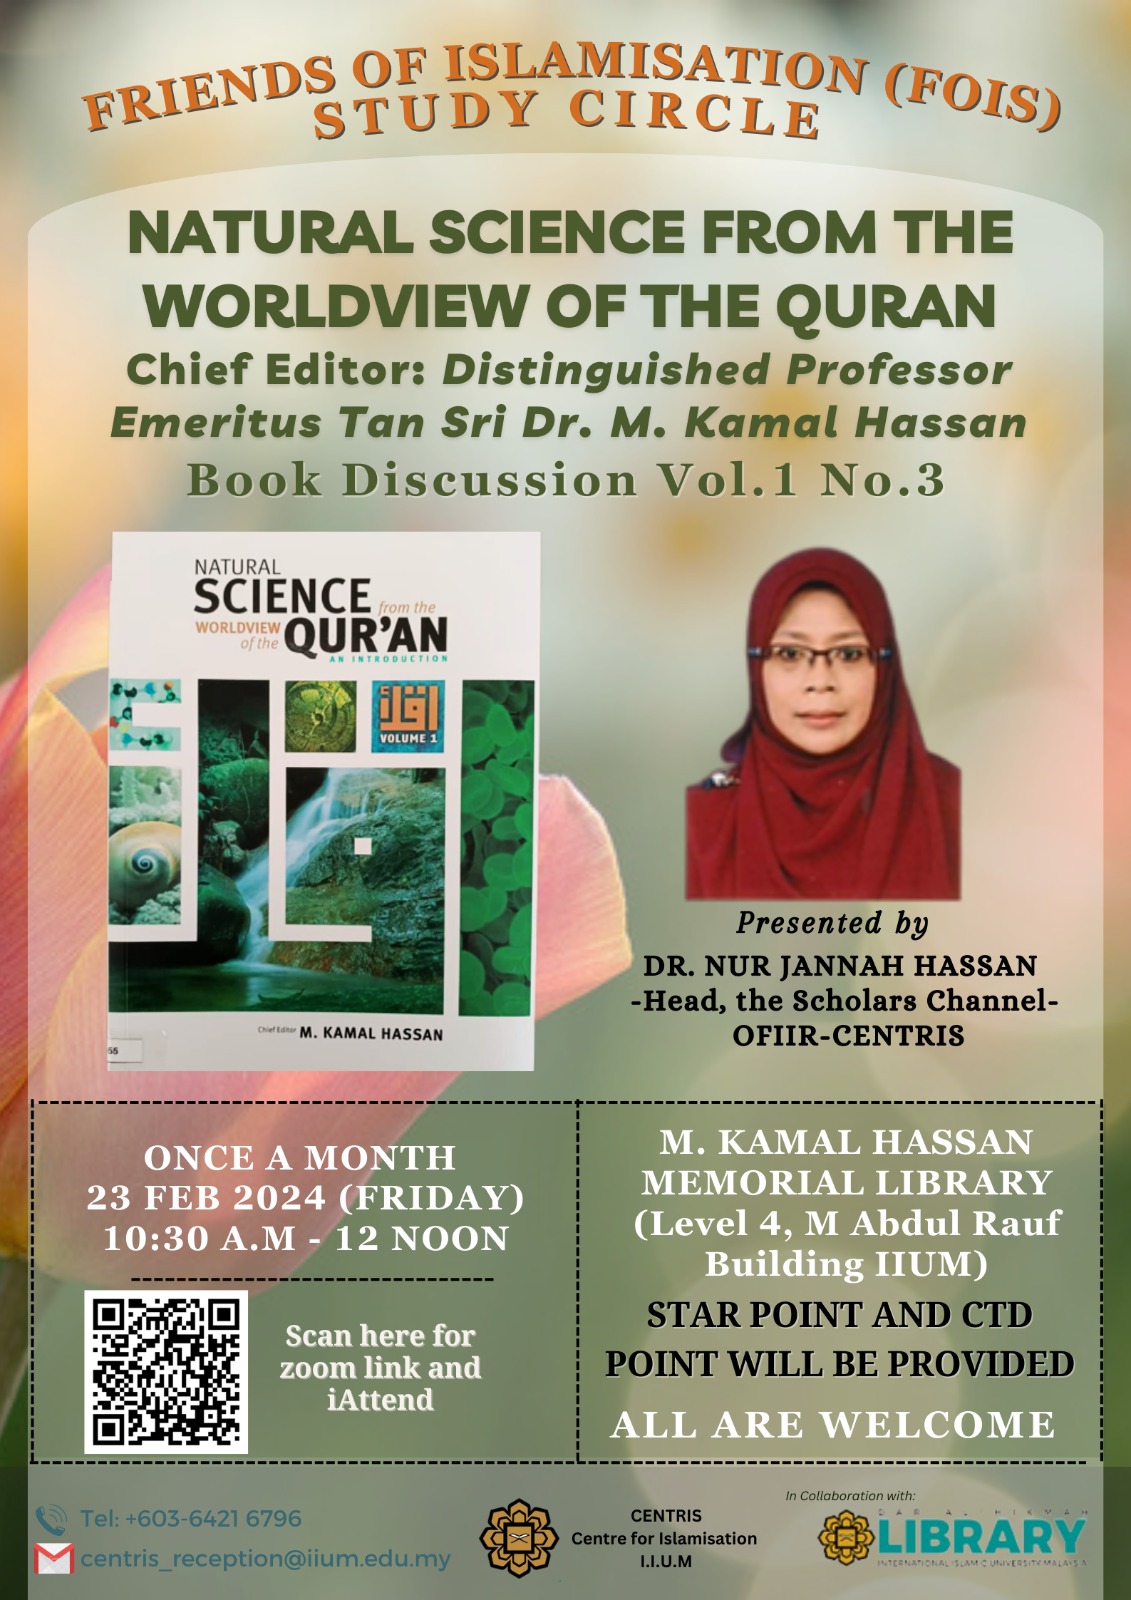 Natural Science from the Worldview of the Quran, Series 3.0